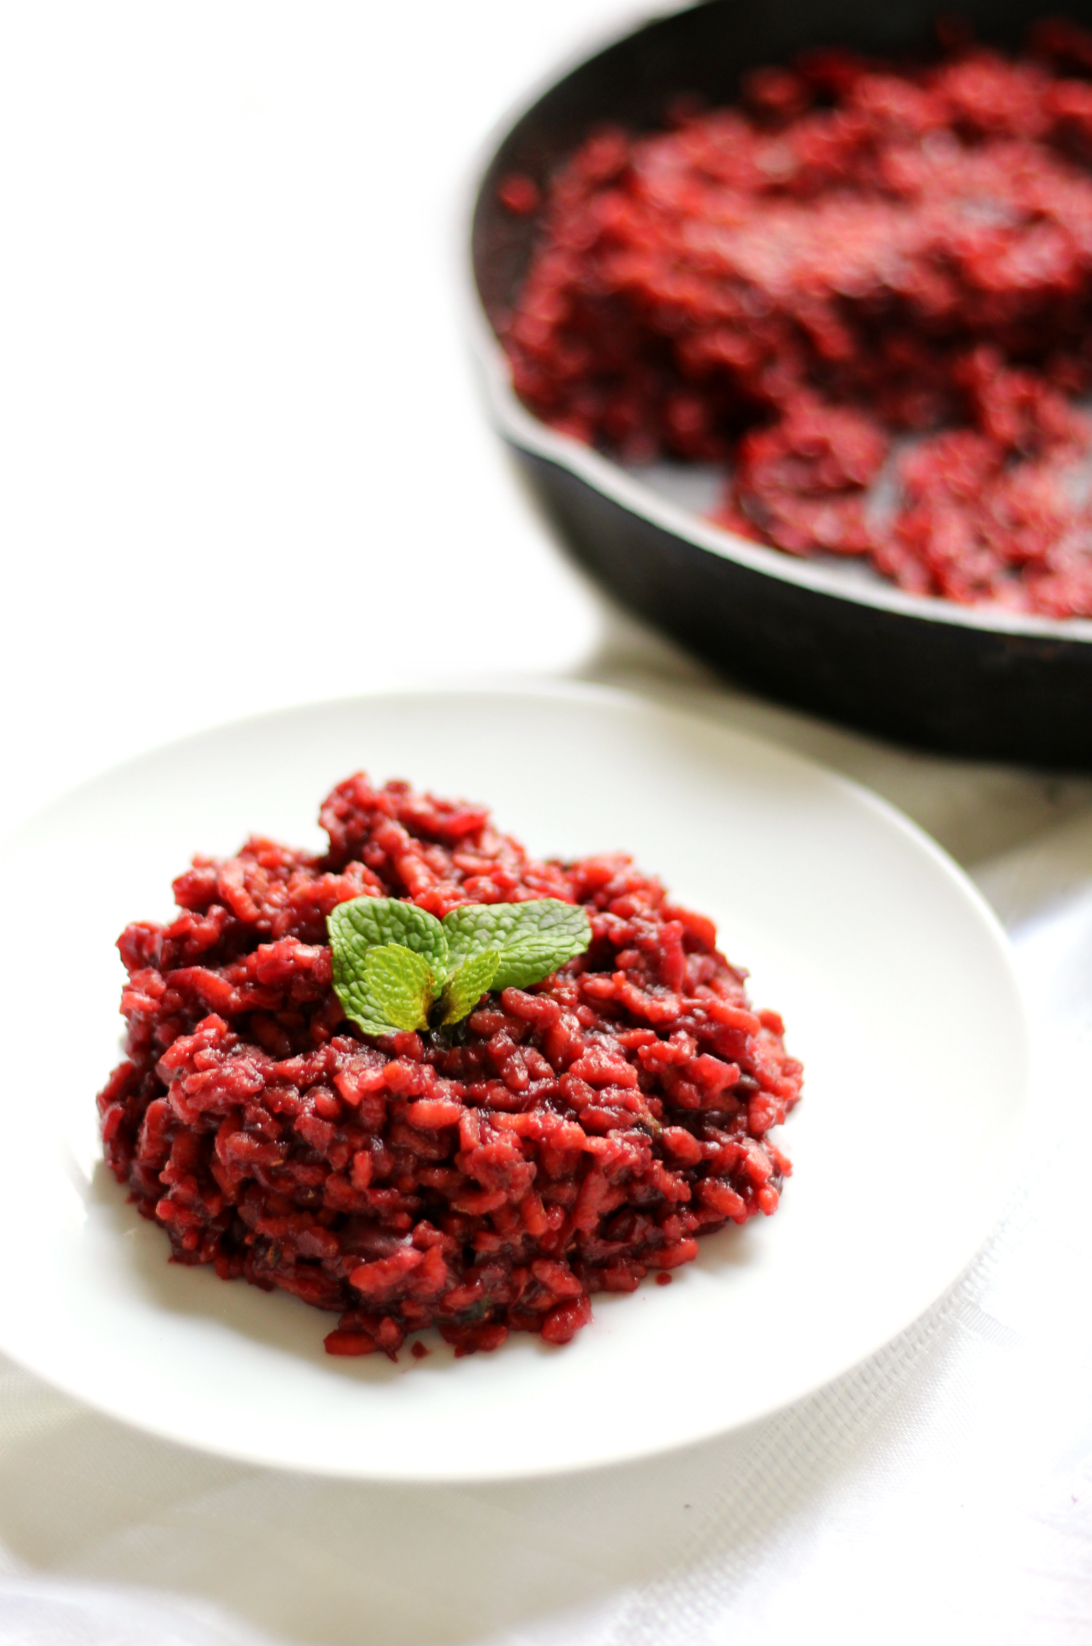 Beetroot Risotto | Strength and Sunshine @RebeccaGF666 Ultra creamy vegan and gluten-free beetroot risotto. A delicious and beautiful side dish done in 30 minutes. This healthy risotto recipe will have you winning dinnertime! [ad]